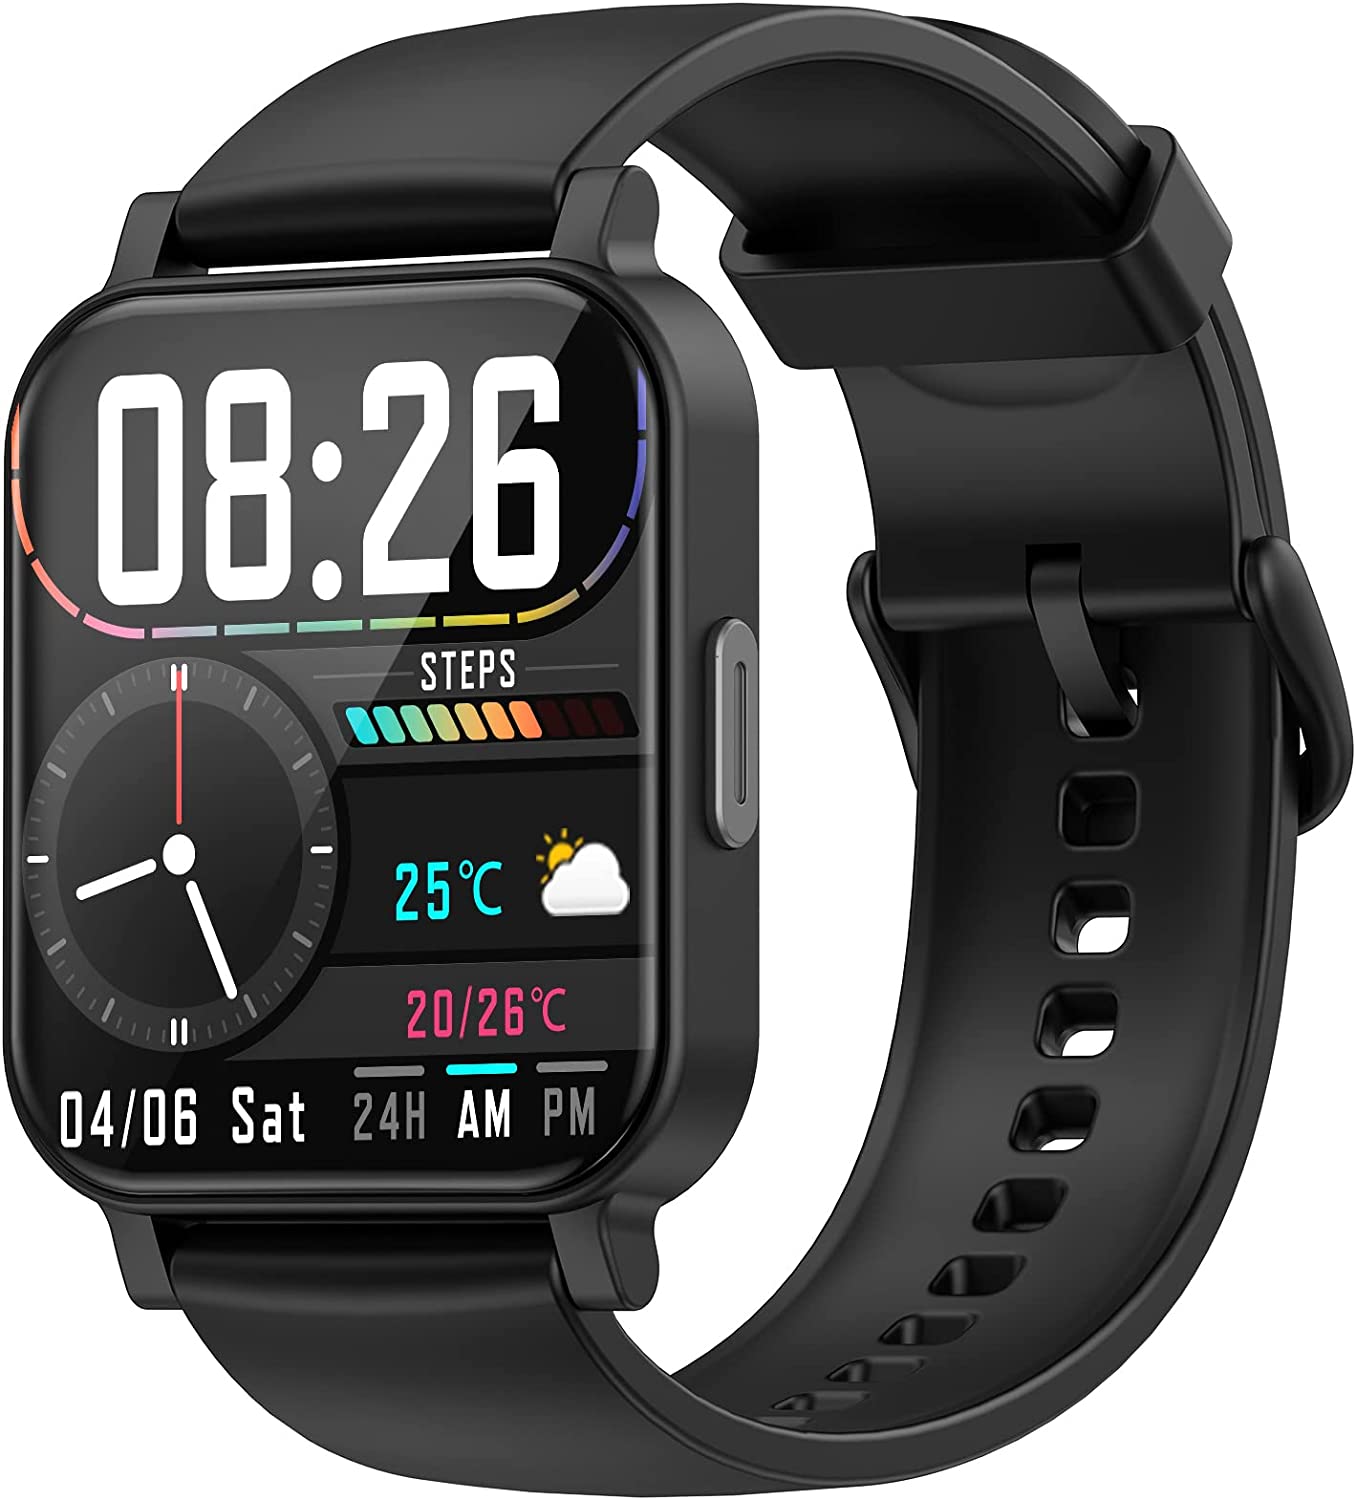 Oraimo Smart Watch, Fitness Watch with Sleep and Heart Rate Monitor